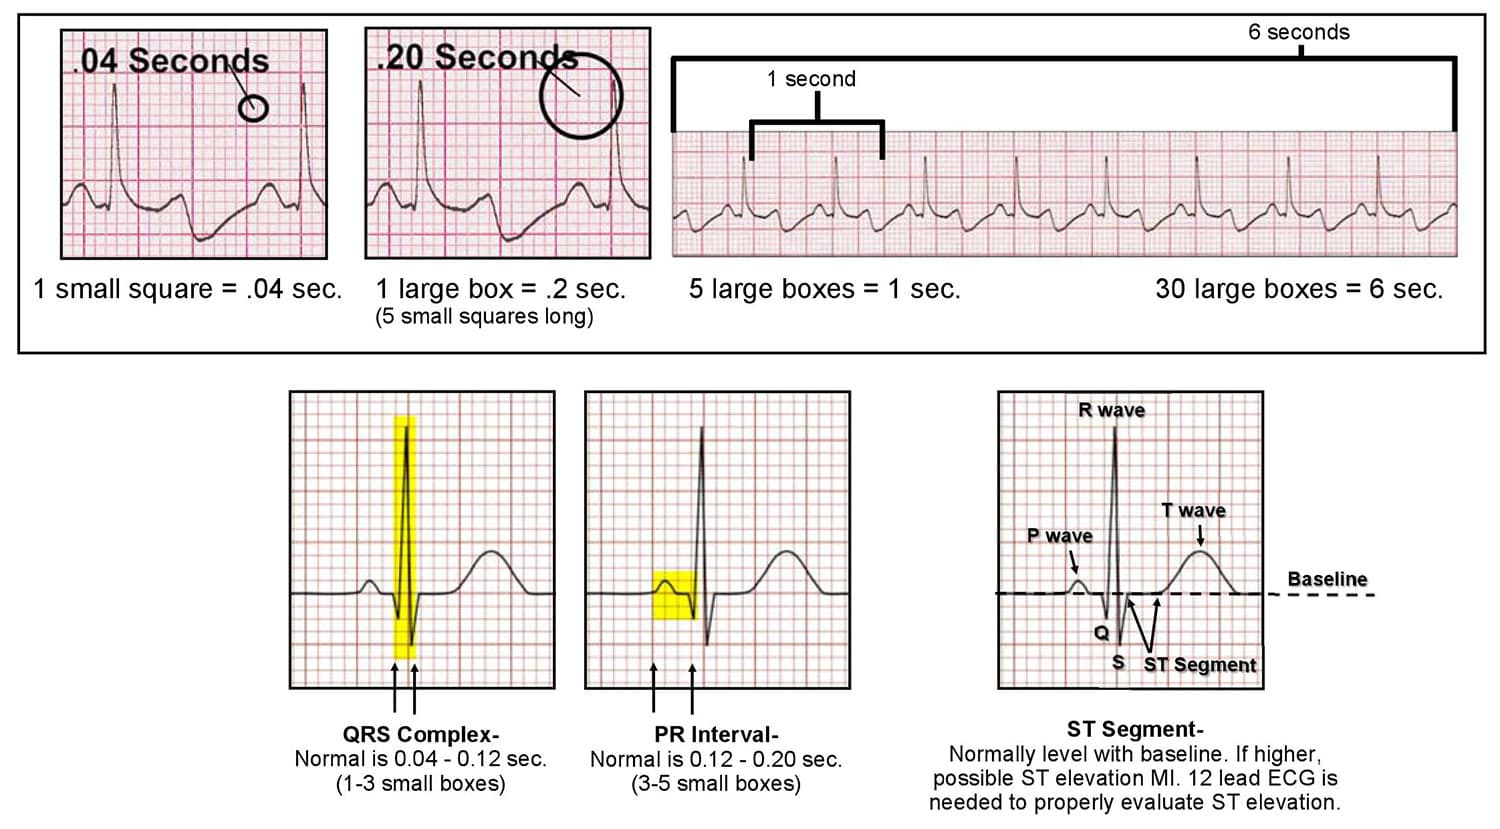 How to read and interpret an ECG/EKG - ACLS Wiki